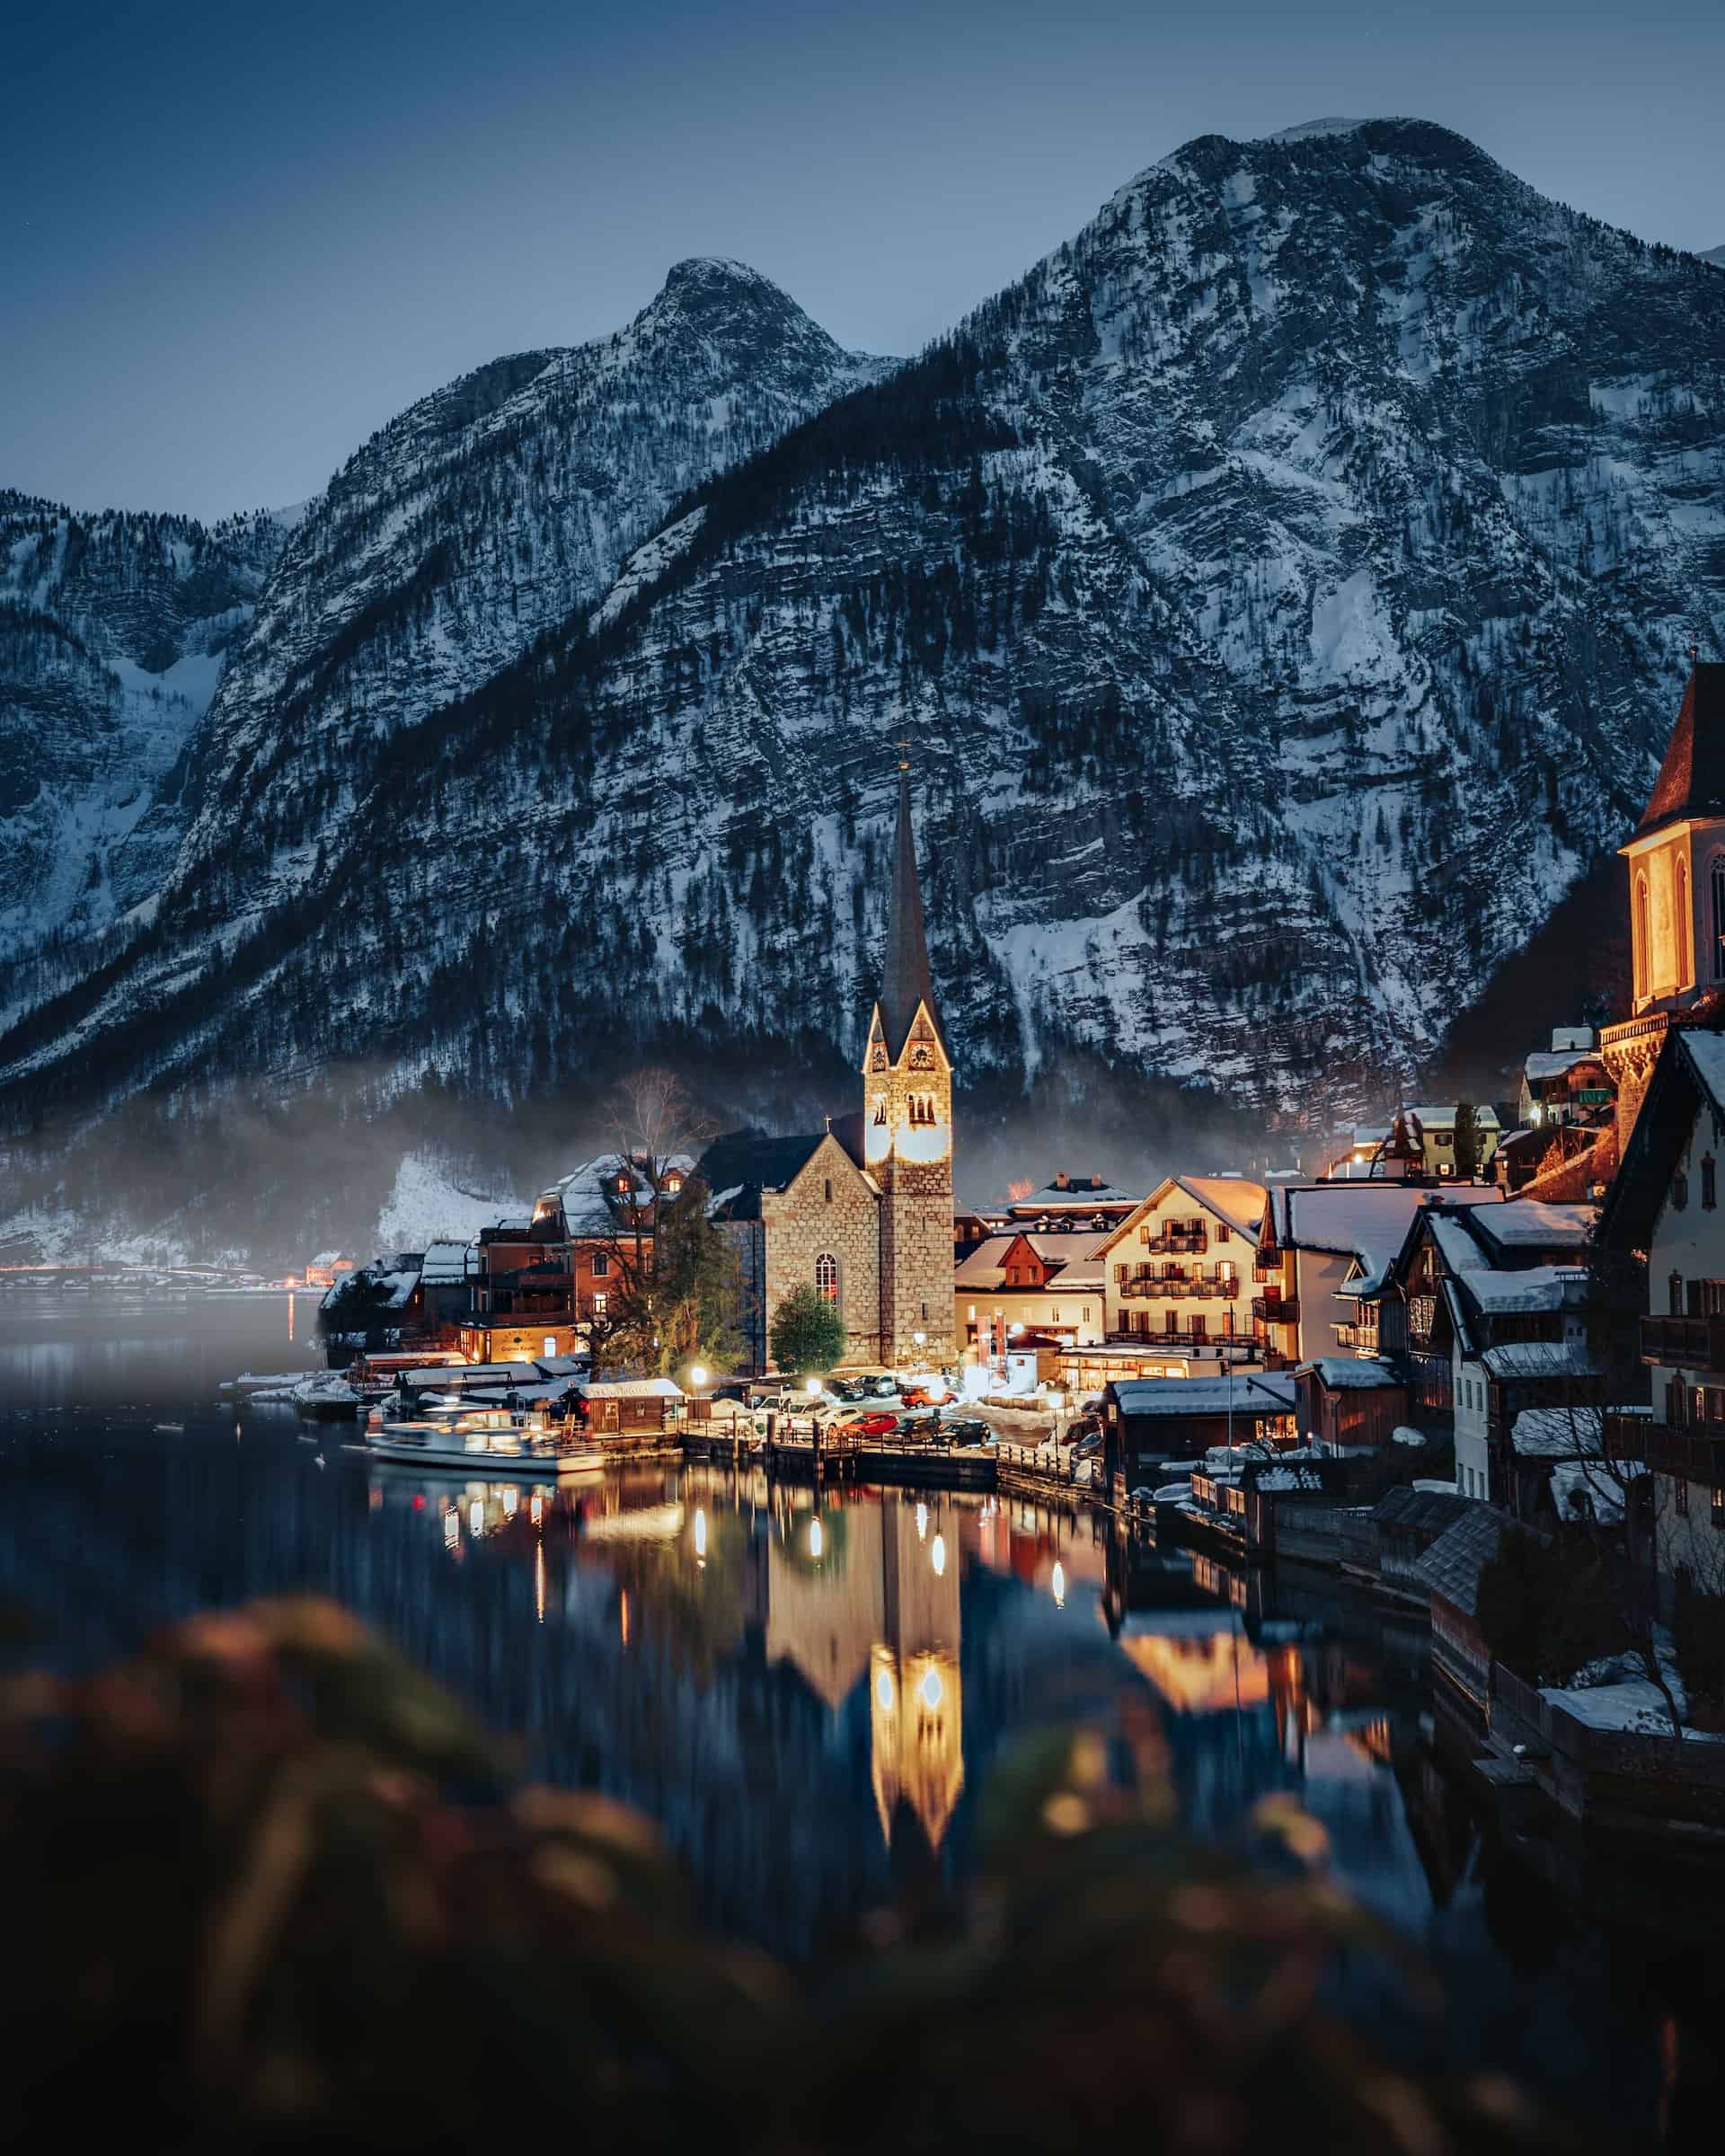 Hallstatt, Austria lit up at night with large snowy mountains in the background. 